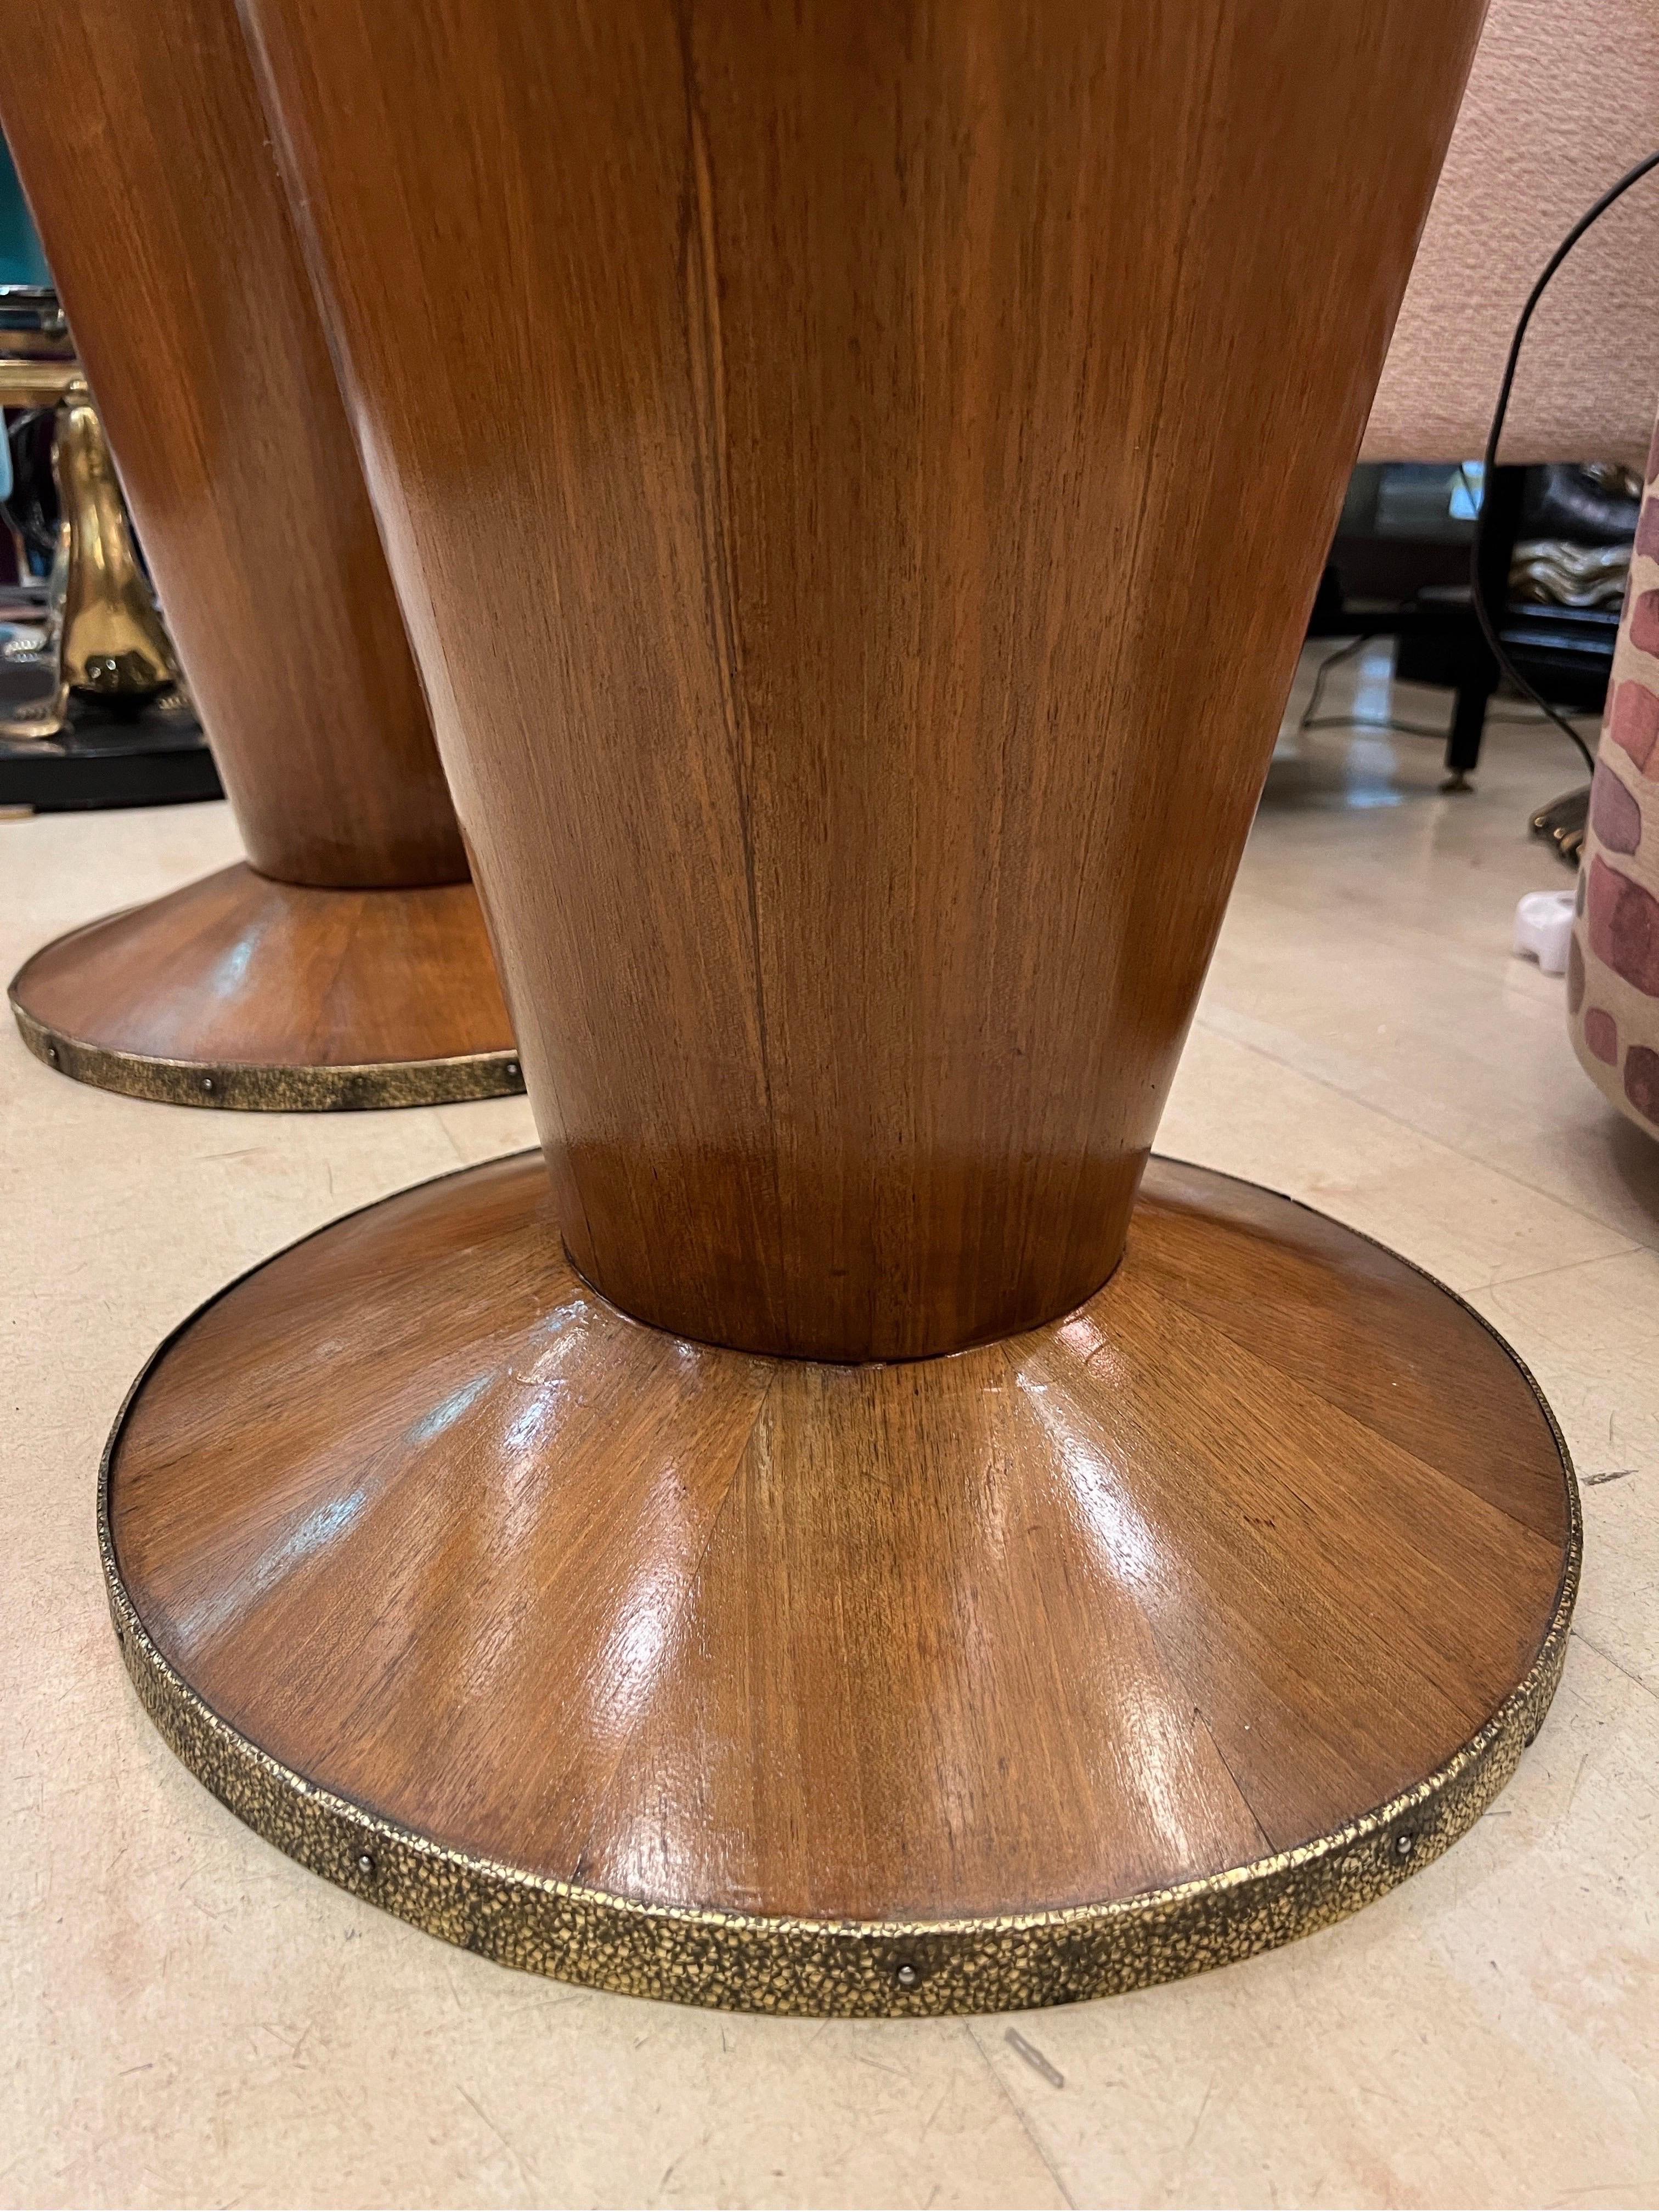 Pair of Art Deco Conical Cherry Wood Side Tables with Marble Top 1940s For Sale 12